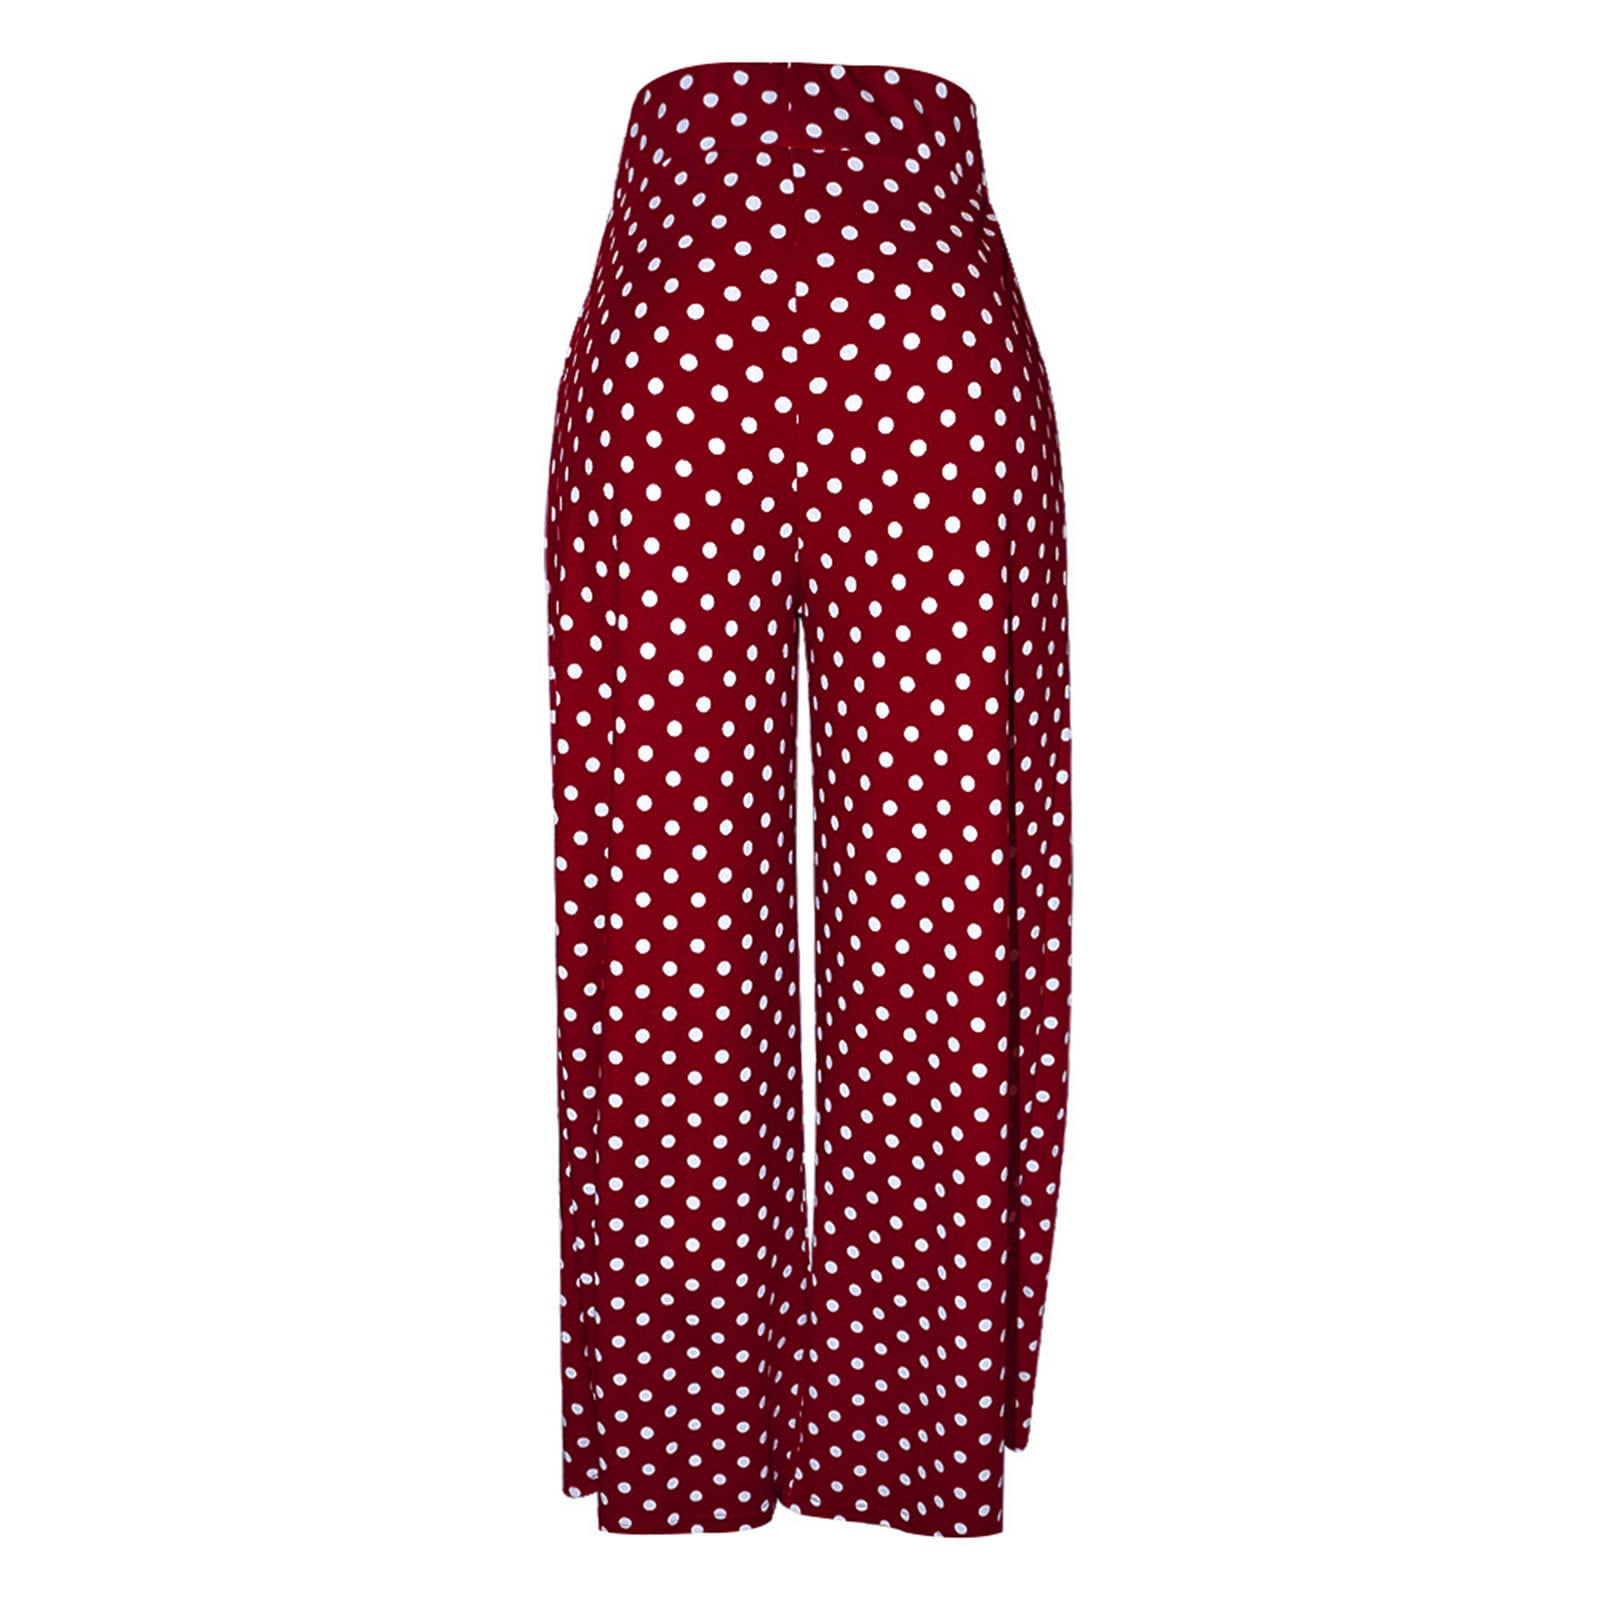 YYDGH Women's Polka Dot Palazzo Pants High Waisted Wide Leg Pants Hidden  Zipper Loose Casual Trousers with Pockets M 